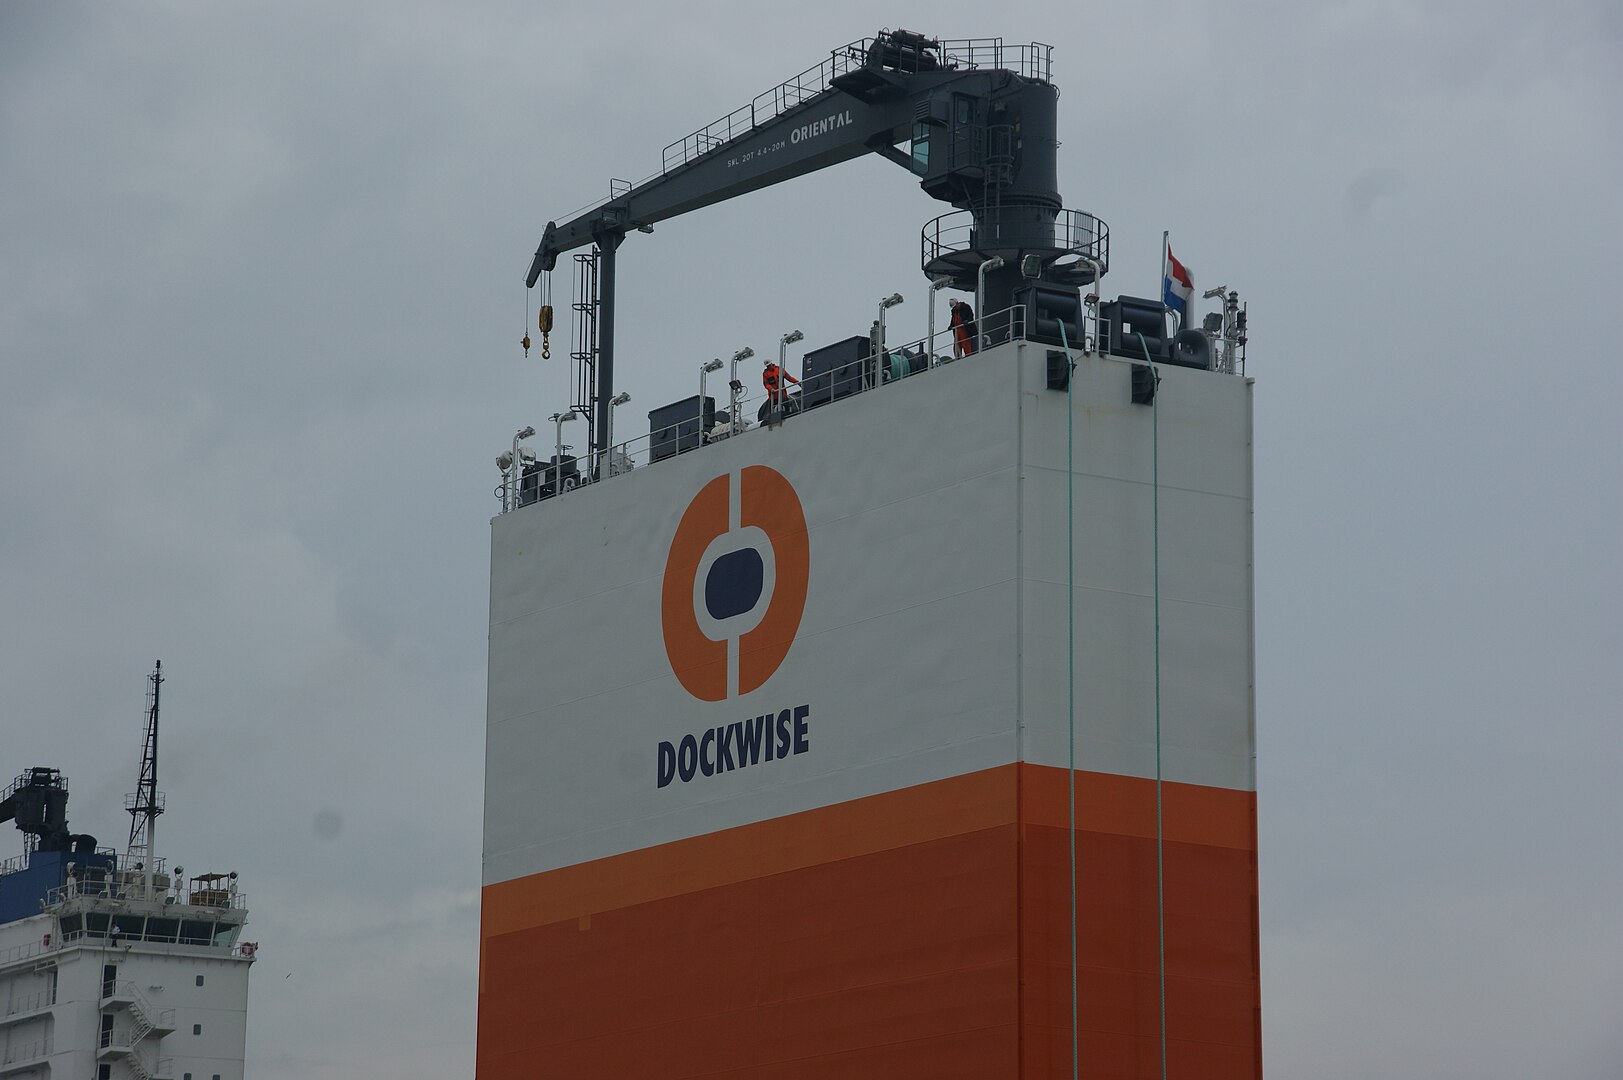 <p>The Dockwise Vanguard operates by taking on water as a ballast, allowing it to sink slightly and creating a space in its docking bay where it can then maneuver a ship in to secure it.</p>  <p>Once secured, the ship pumps out the ballast and lifts the other ship out of the water, safely within the Dockwise Vanguard.</p>